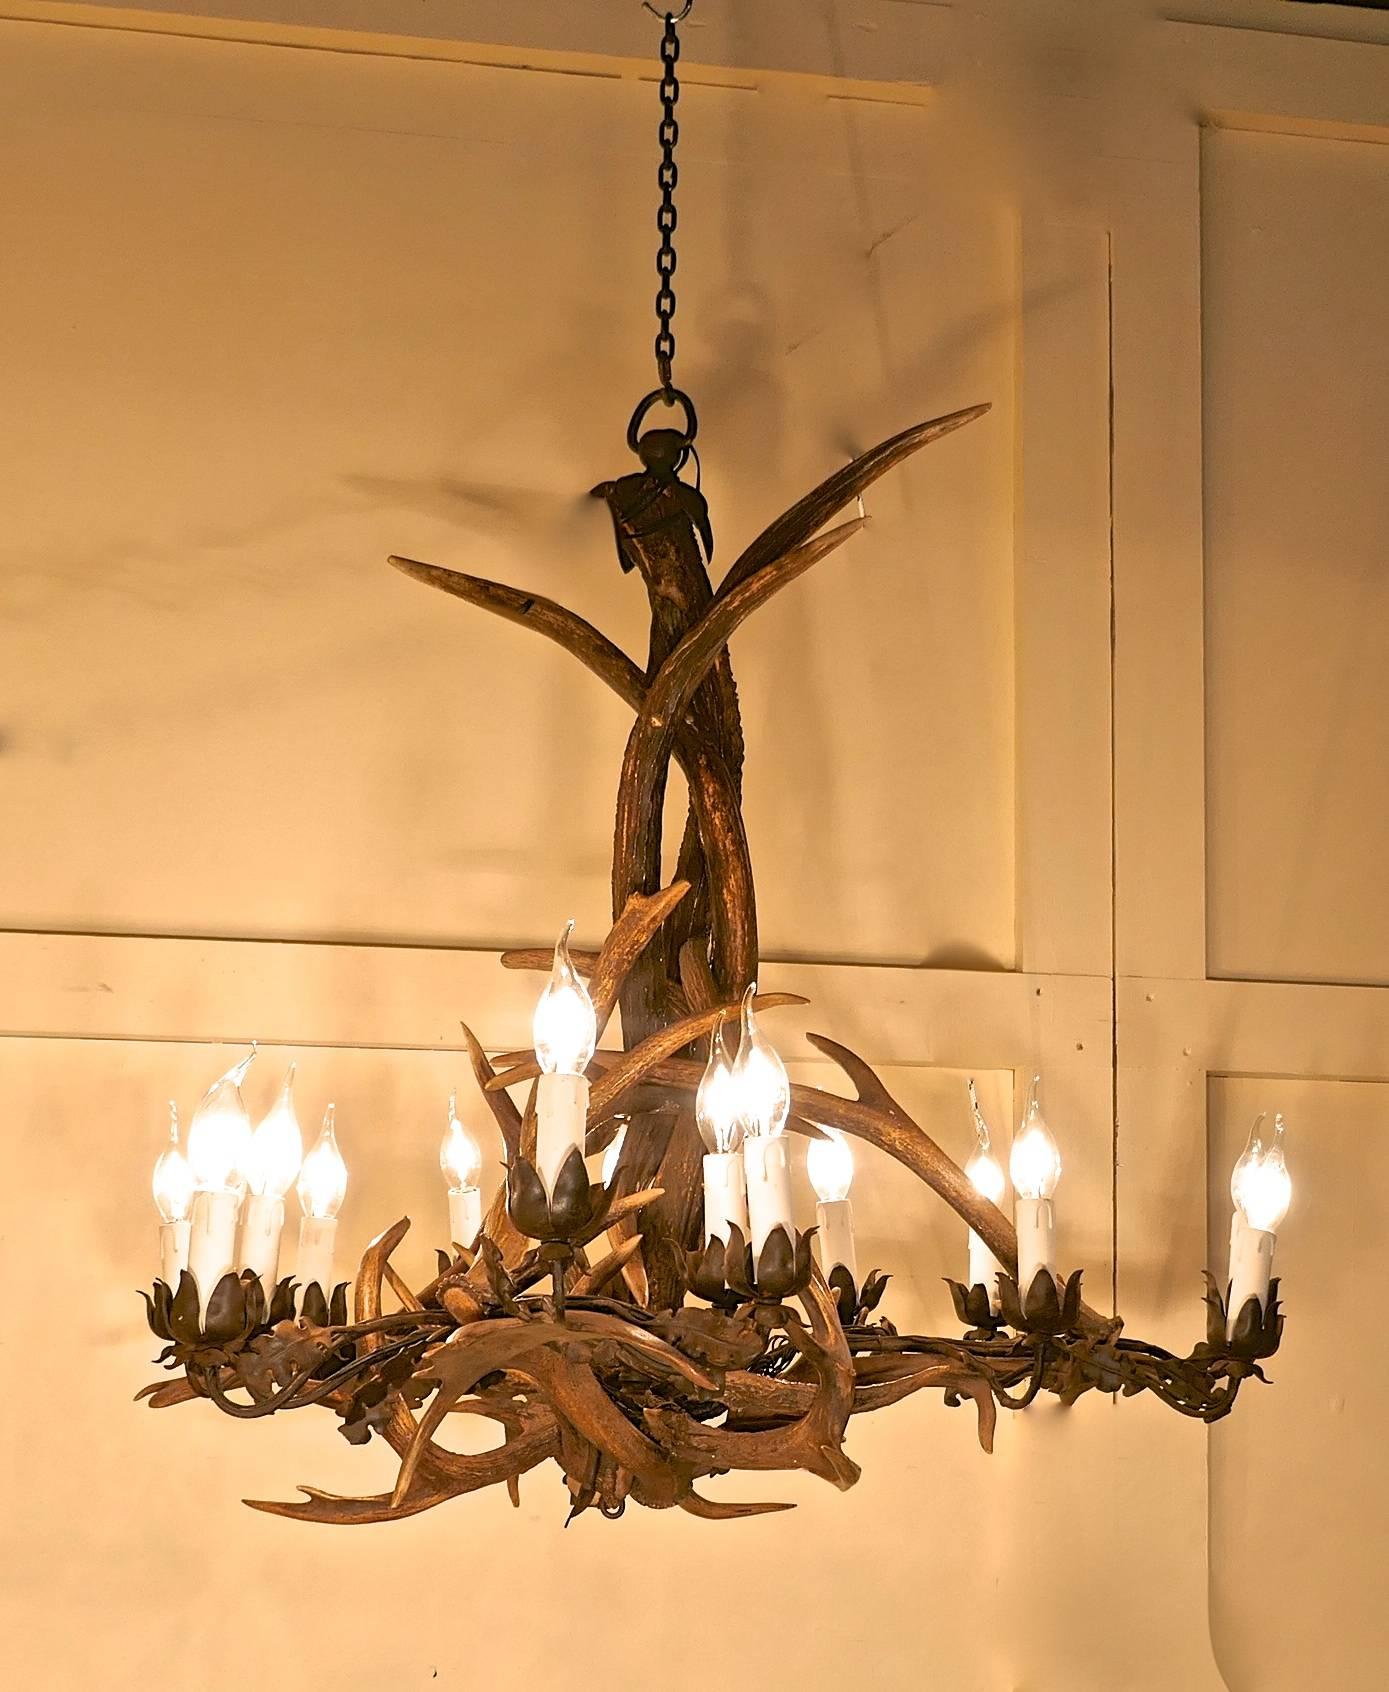 Very large German 19th century Black Forest stag antler hanging chandelier
 
This is an imposing and unusual piece, it is larger than most.

The chandelier was made in the second half of the 19th century, the sconces and cups made in iron, they